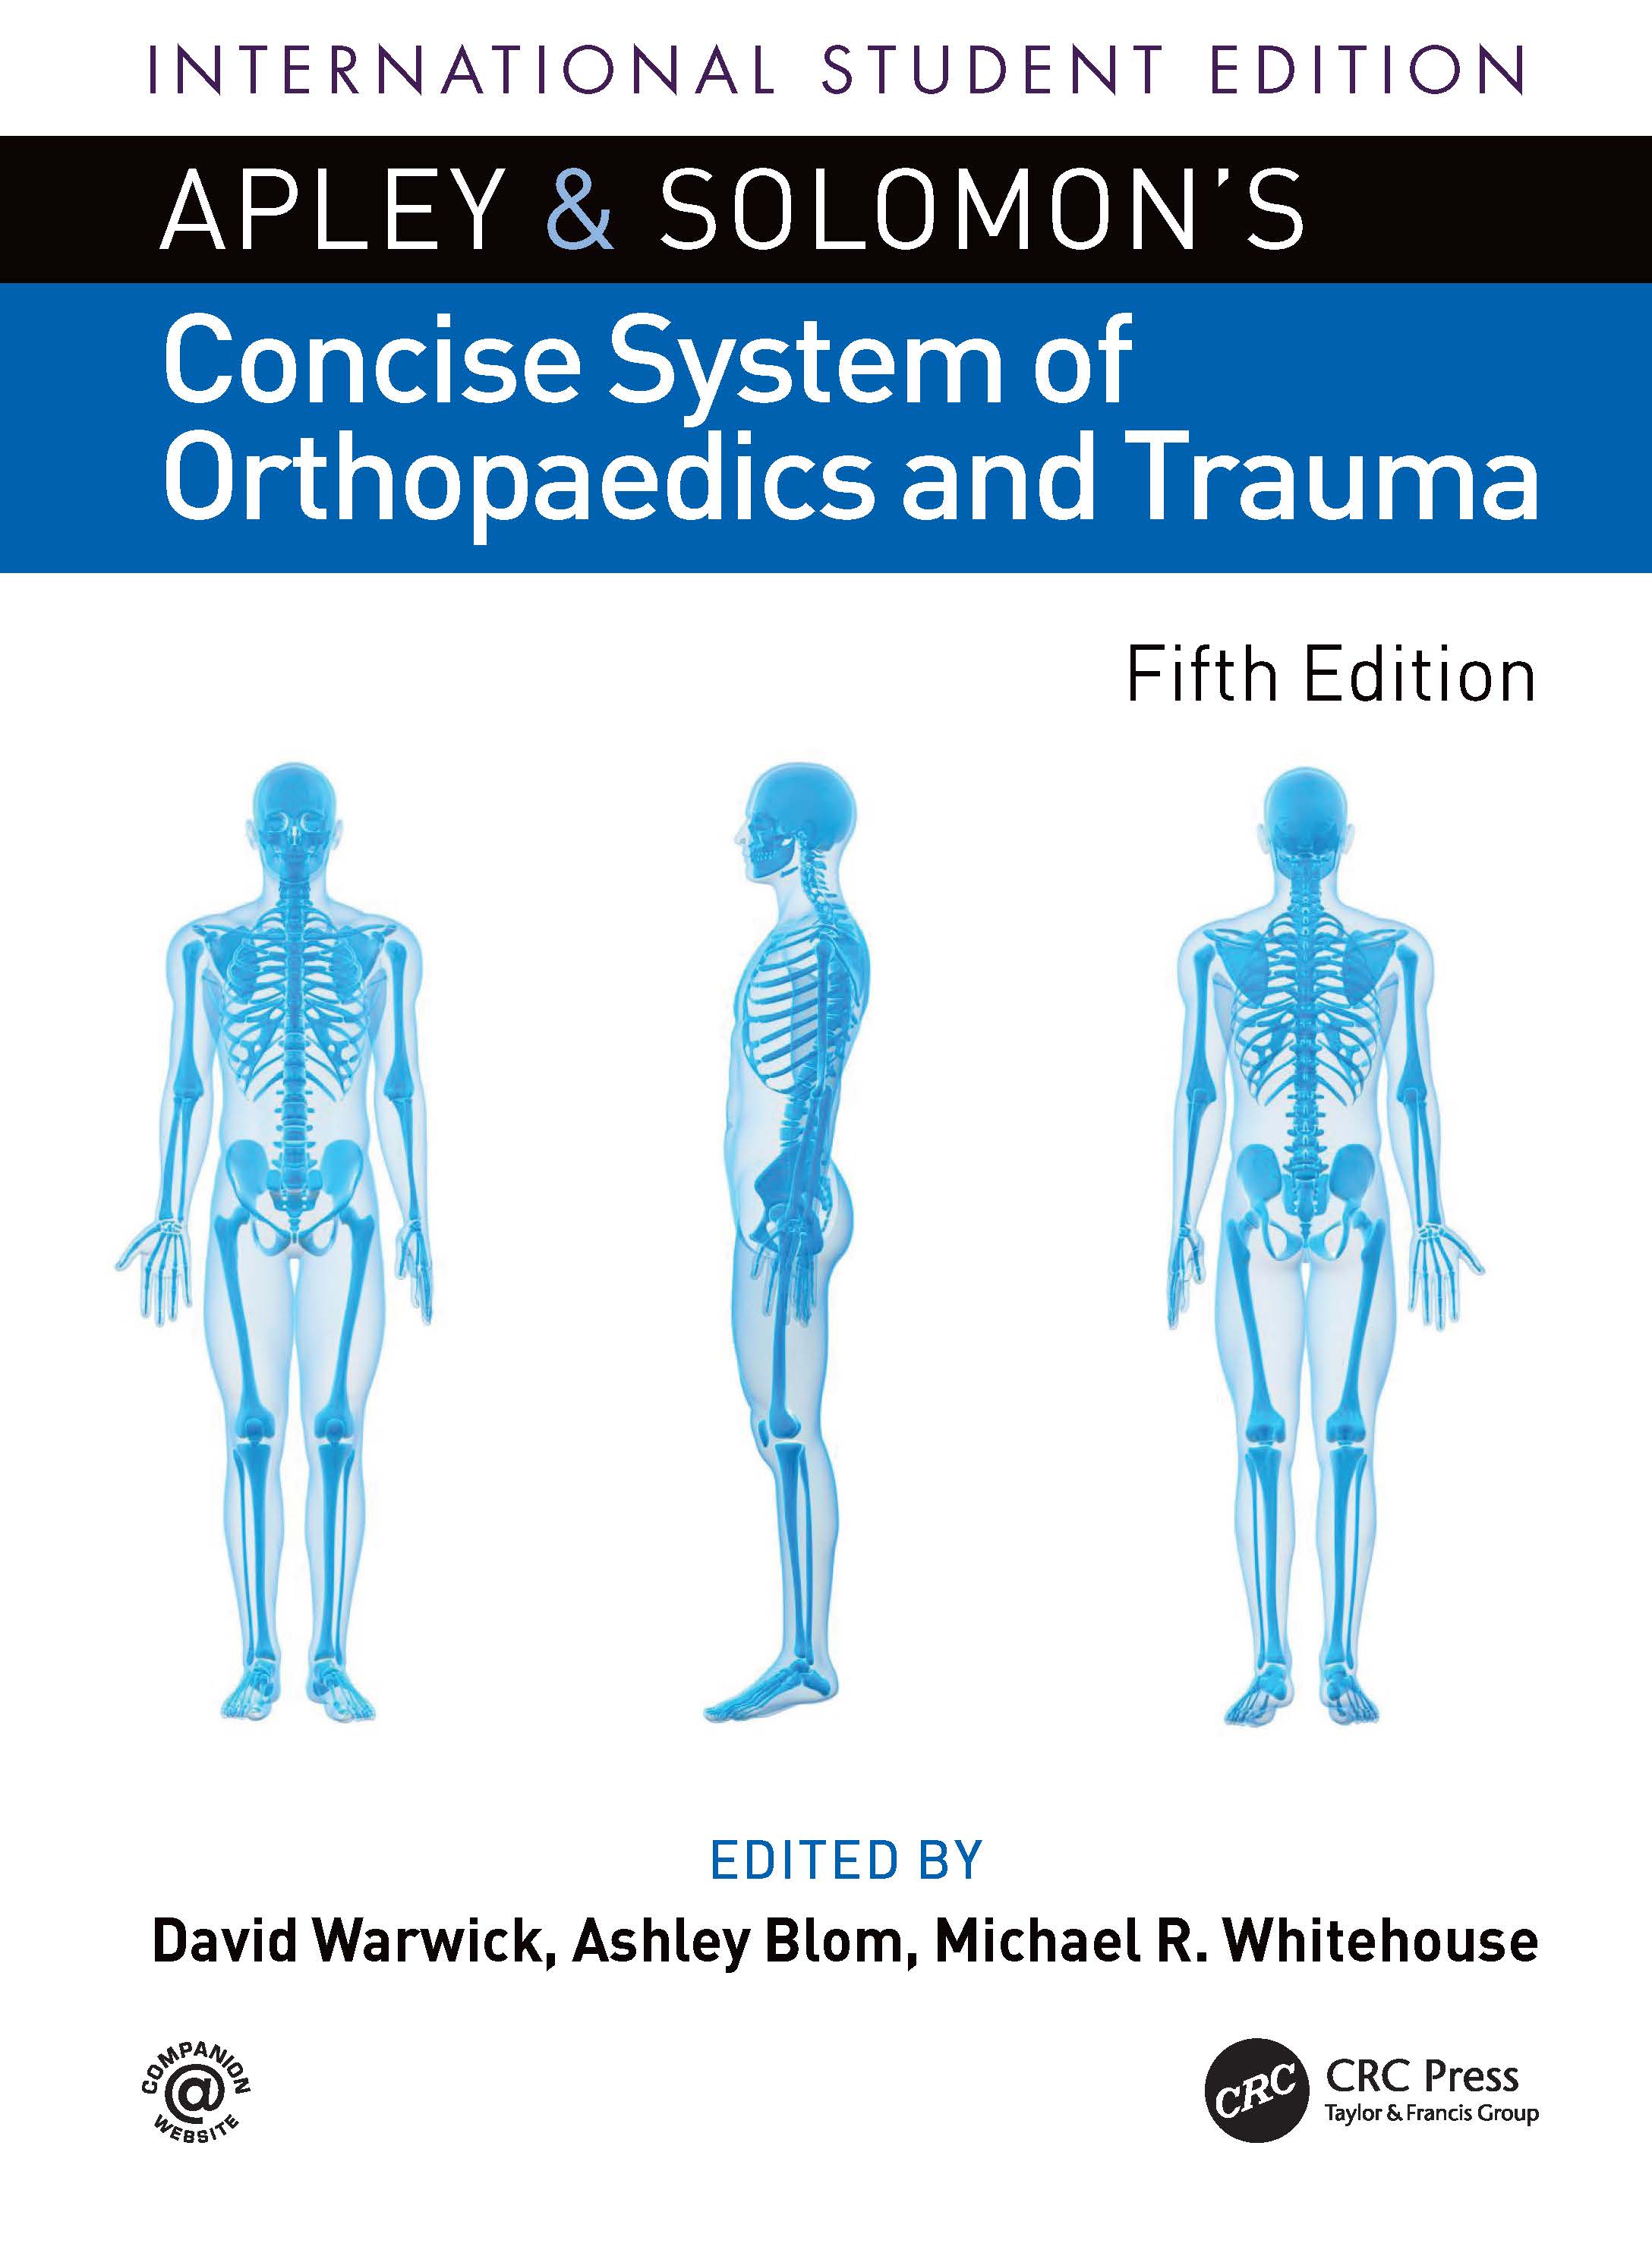 APLEY & SOLOMON'S CONCISE SYSTEMS OF ORTHOPEDICS AND TRAUMA